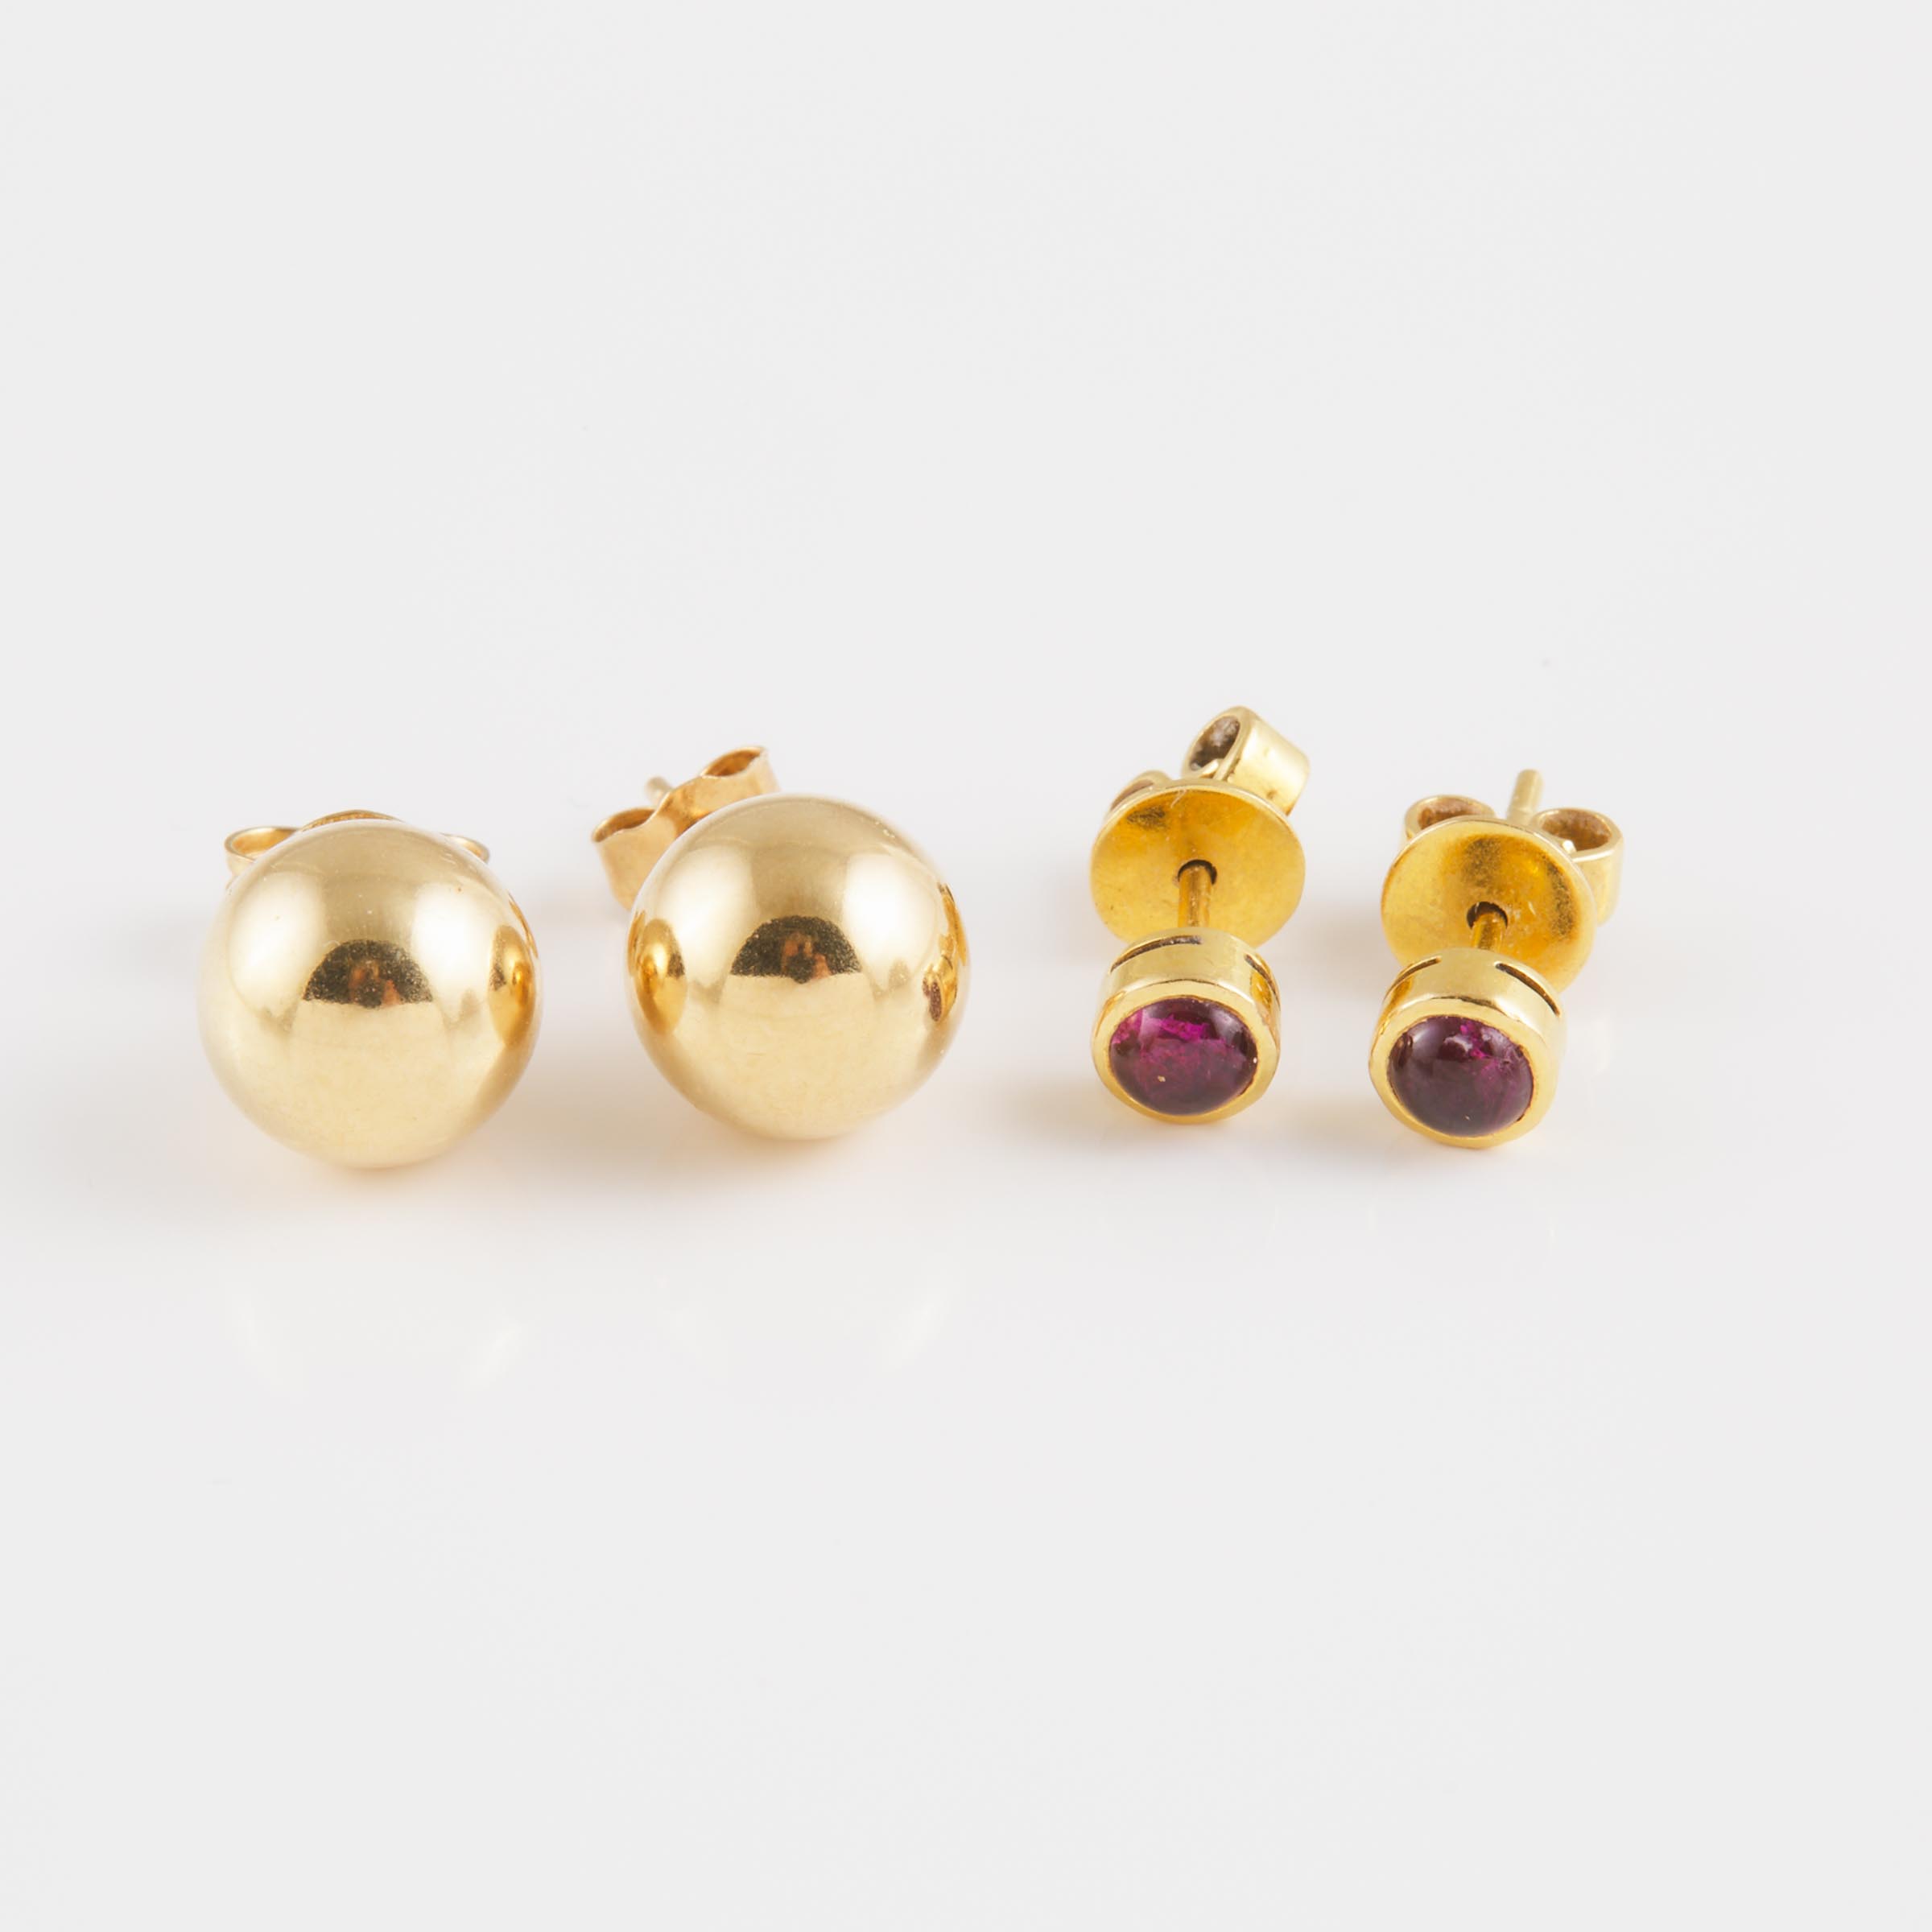 2 Pairs Of Yellow Gold Earrings